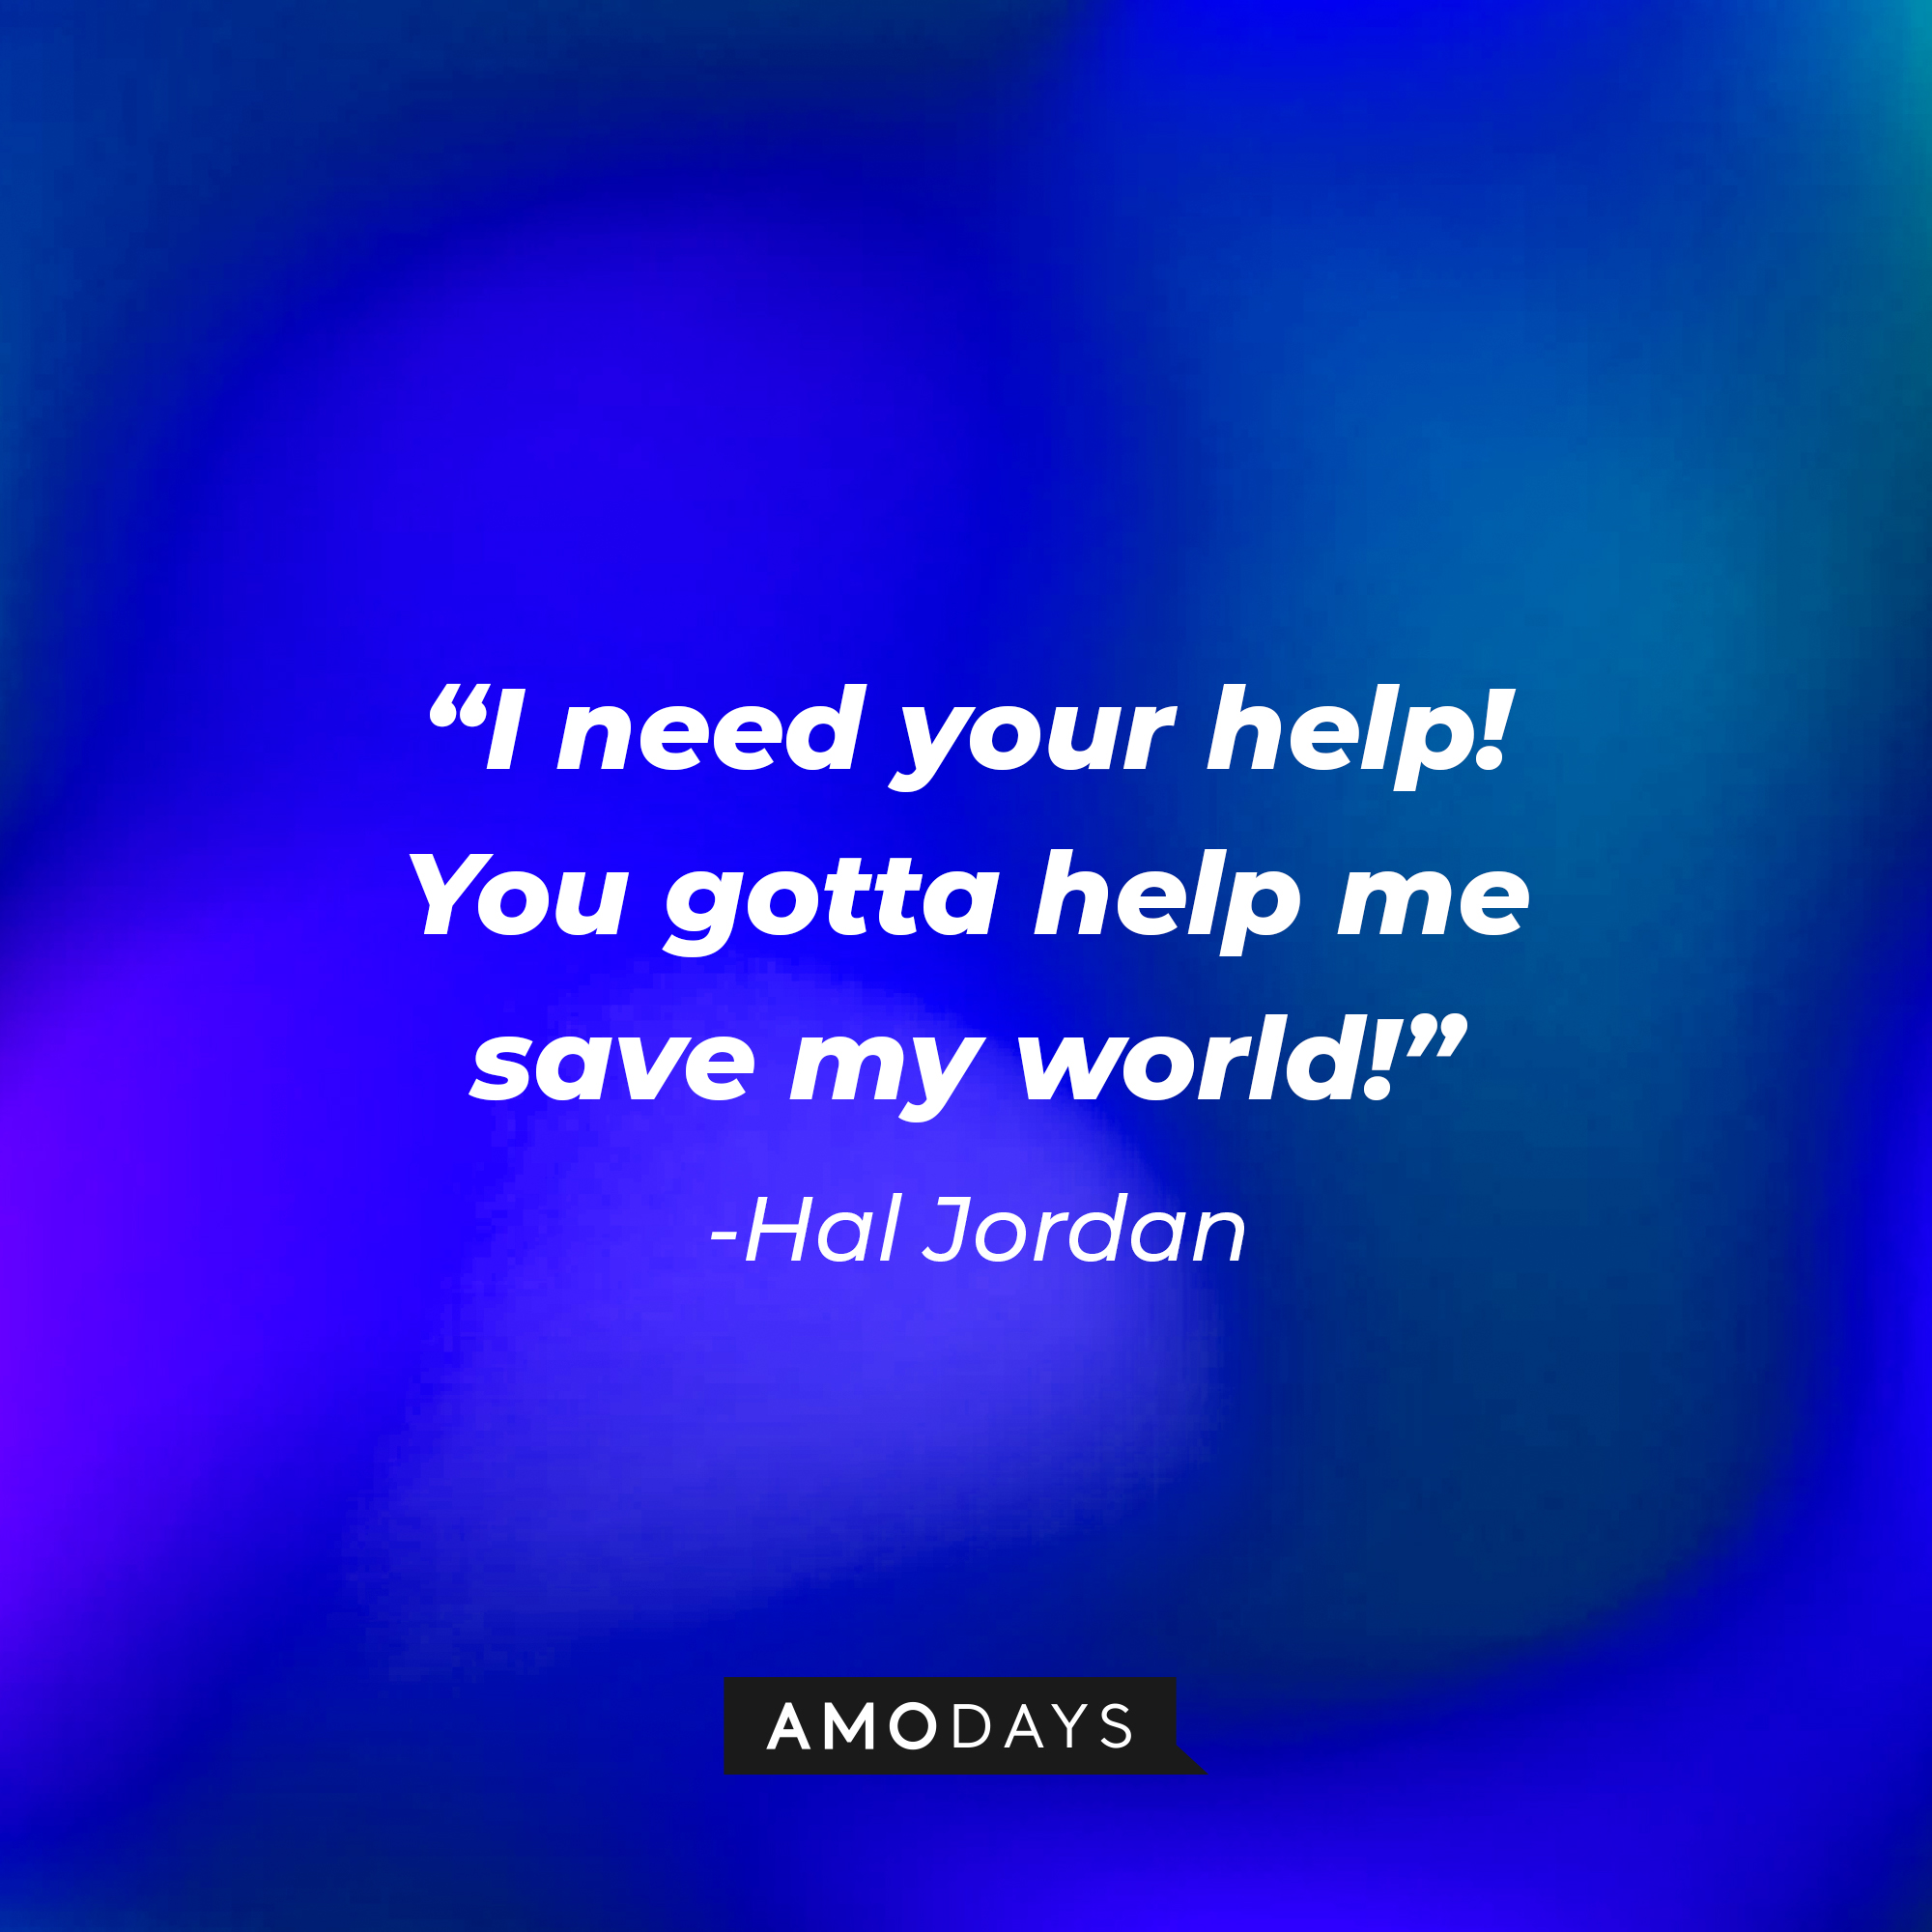 Hal Jordan's quote: "I need your help! You gotta help me save my world!" | Source: AmoDays